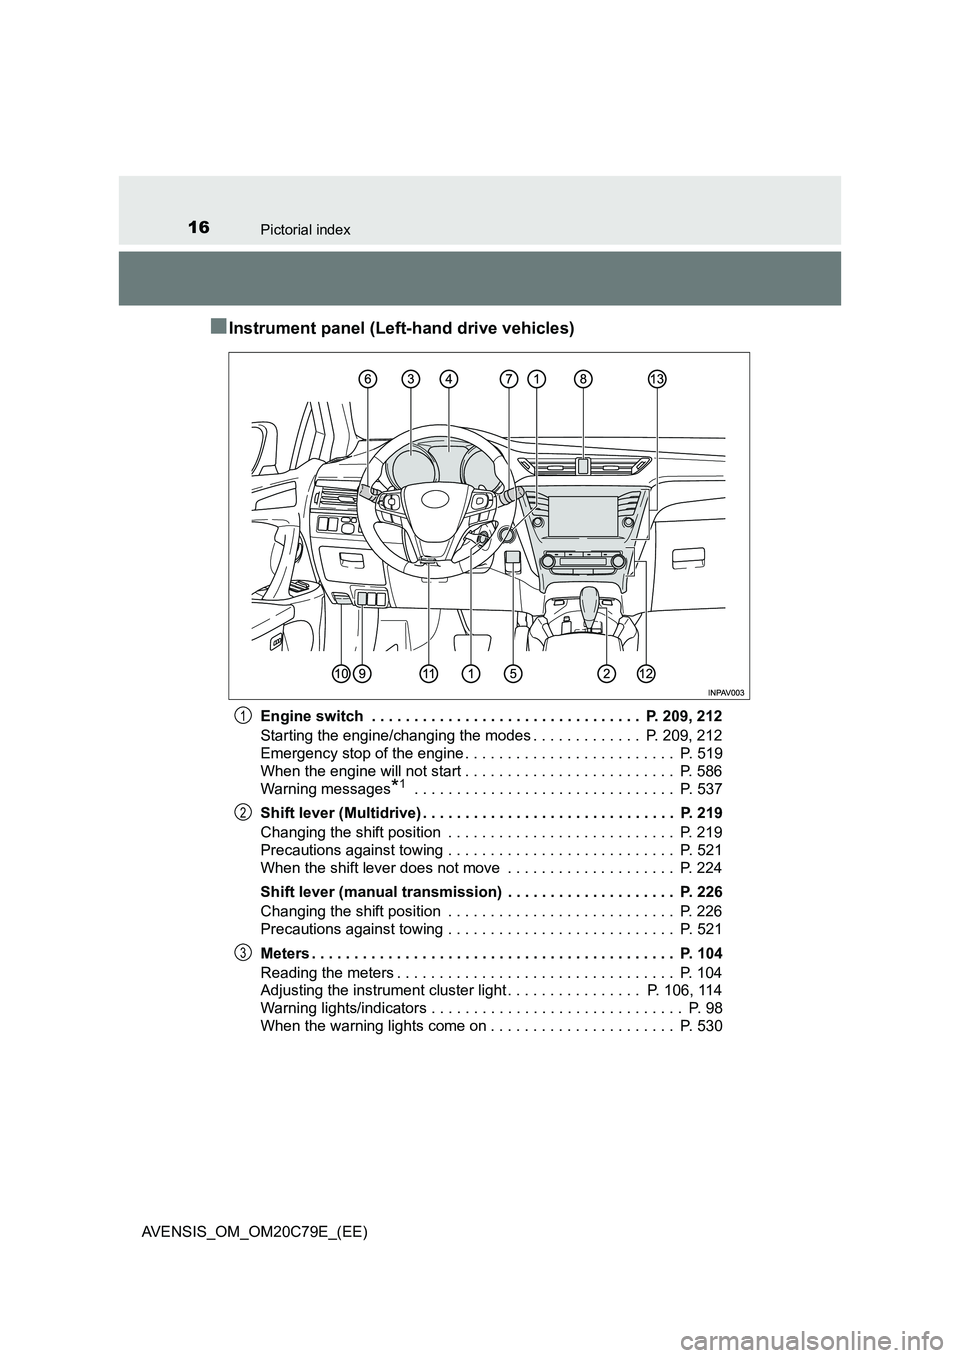 TOYOTA AVENSIS 2018  Owners Manual 16Pictorial index
AVENSIS_OM_OM20C79E_(EE)
■Instrument panel (Left-hand drive vehicles)
Engine switch  . . . . . . . . . . . . . . . . . . . . . . . . . . . . . . . .  P. 209, 212
Starting the engin